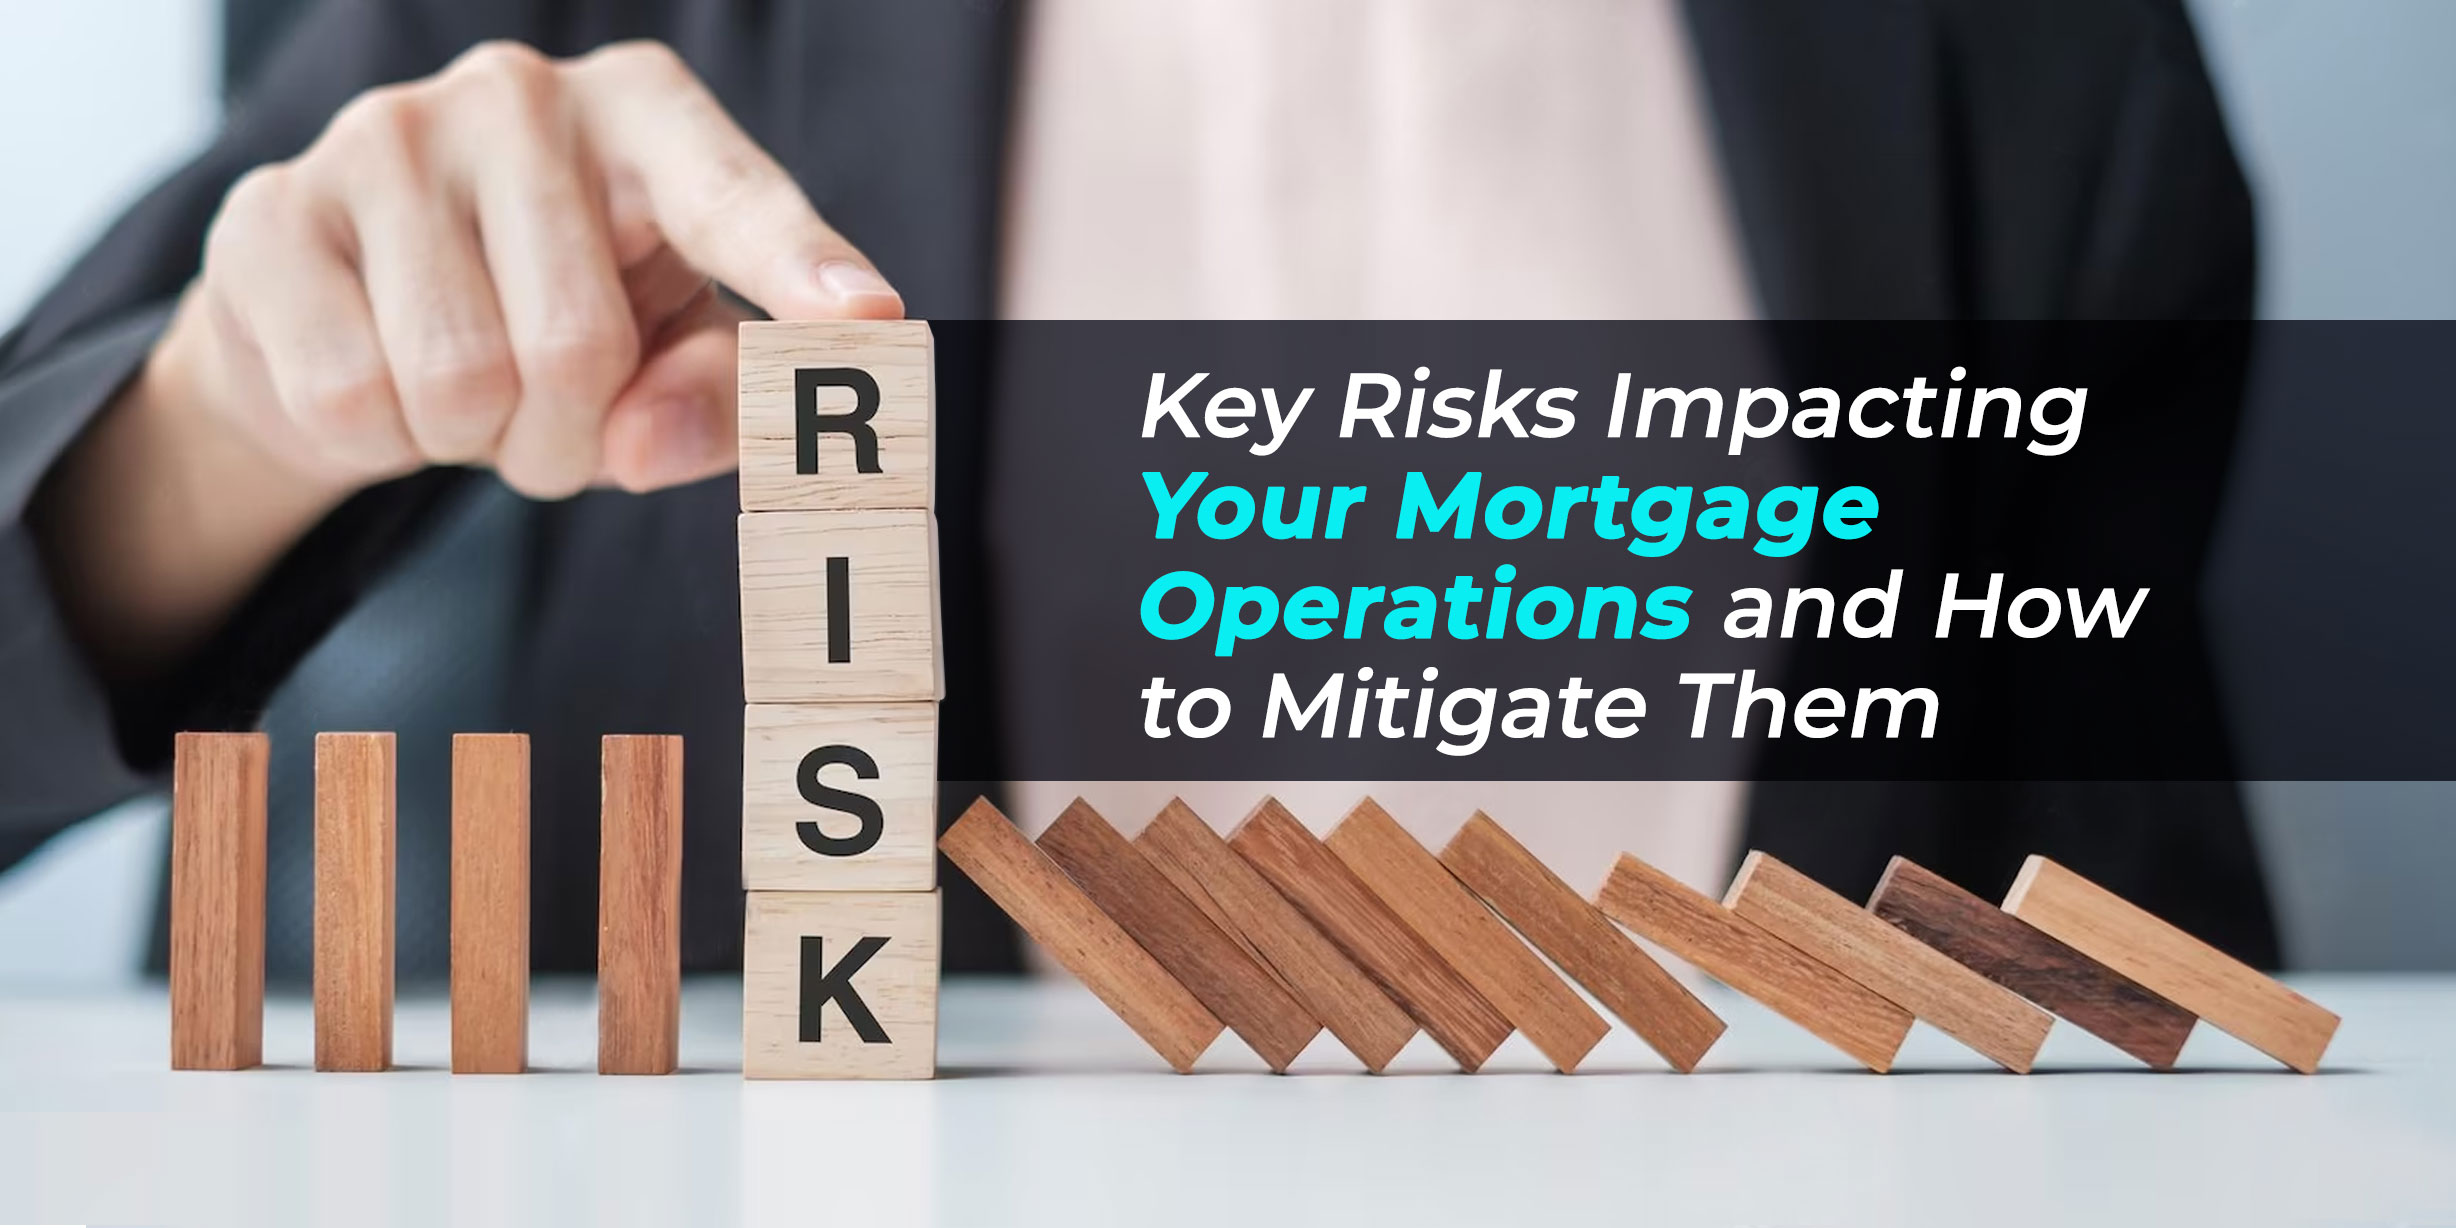 Key Risks Impacting Your Mortgage Operations and How to Mitigate Them